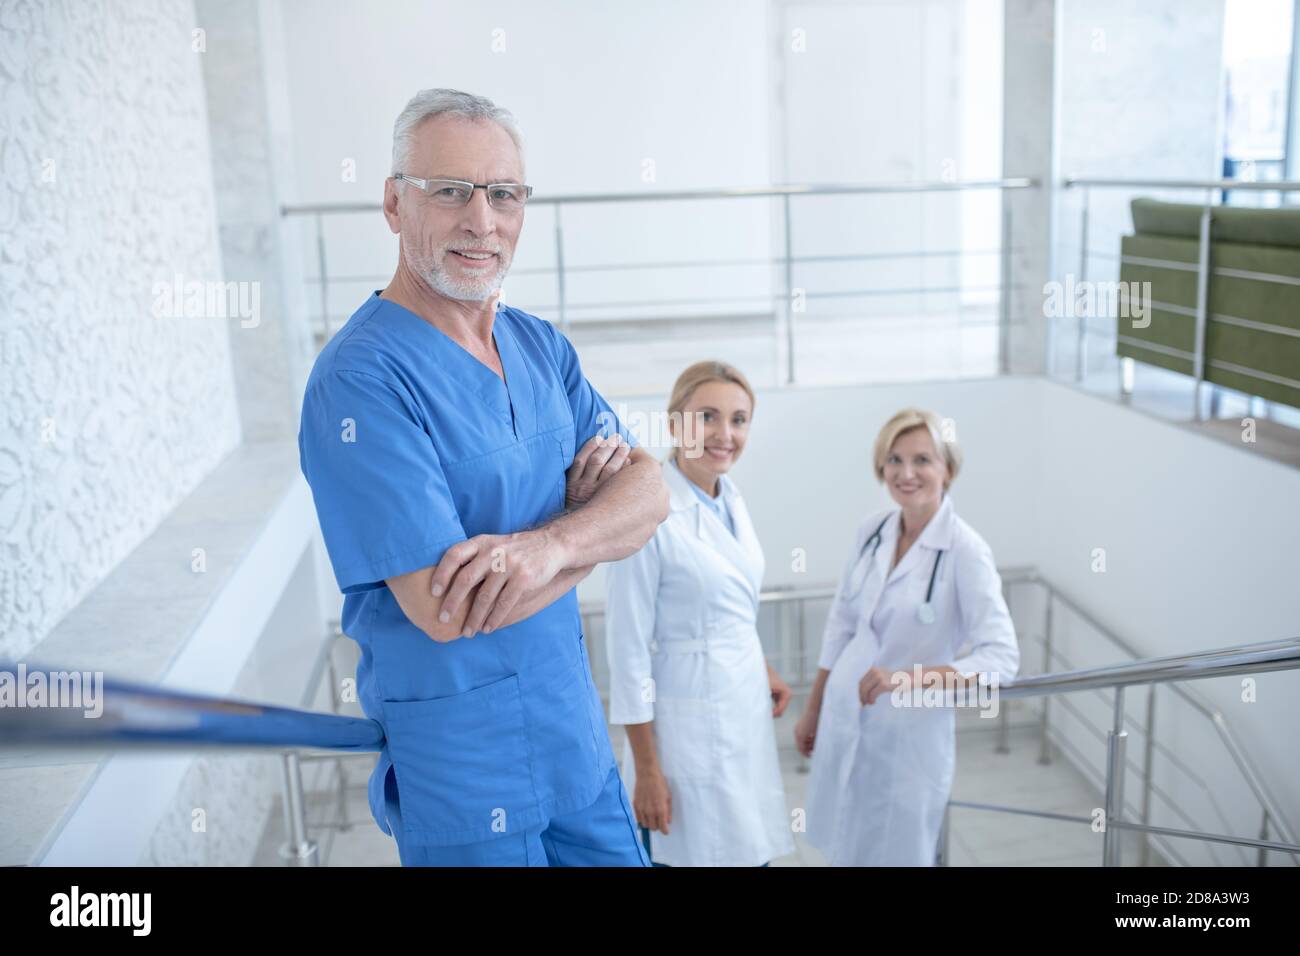 Team of smiling medical workers standing on stairs Stock Photo